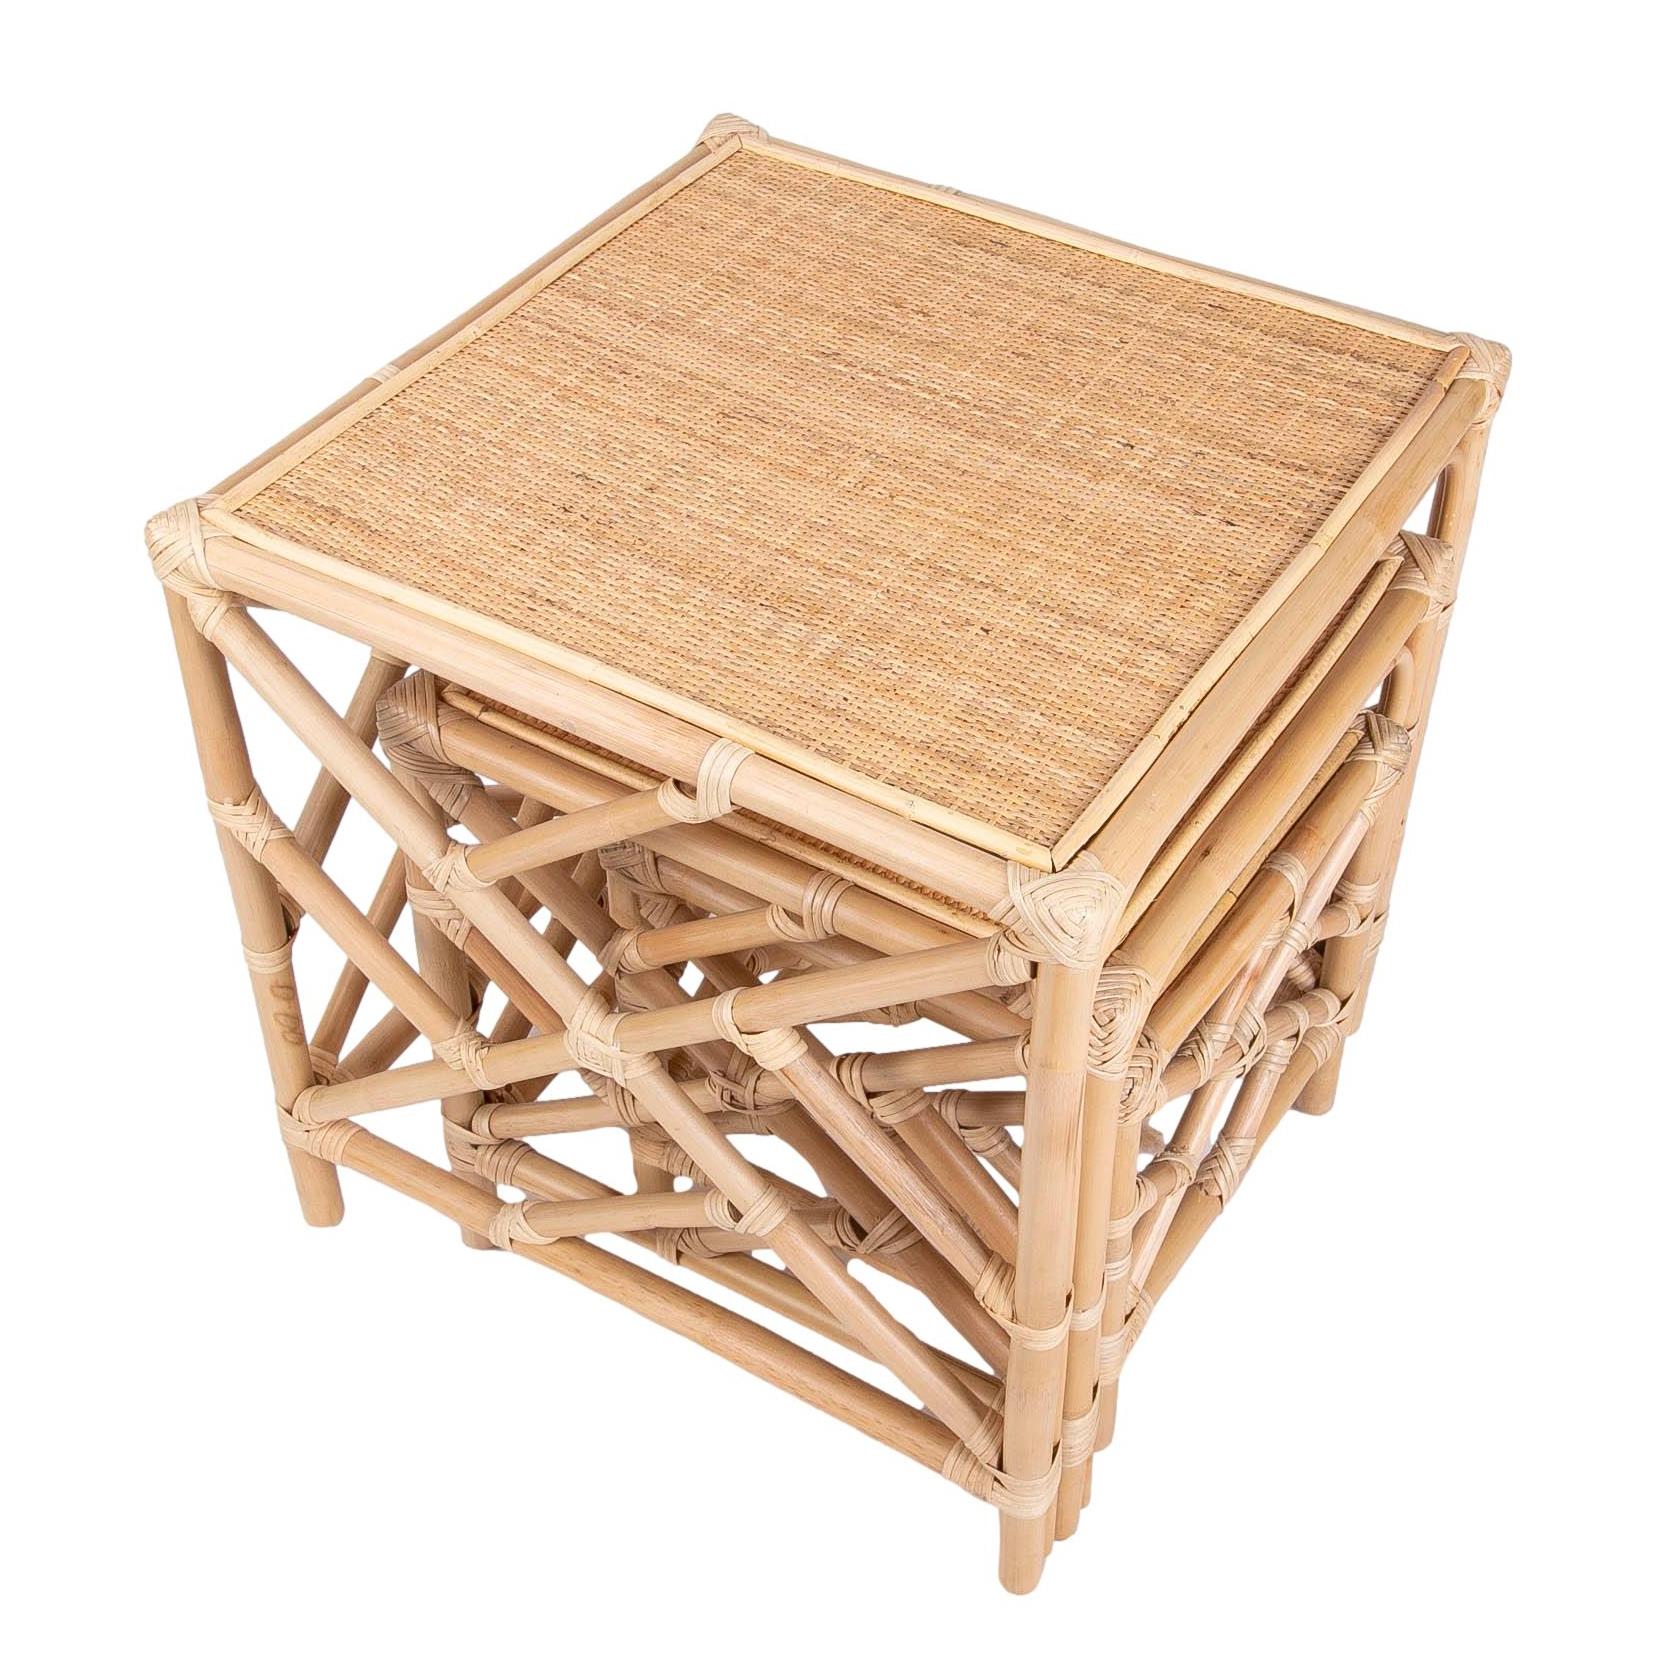 Bamboo and wicker Nesting Table Consisting of Three Tables in Different Sizes

Dimensions are of the largest item